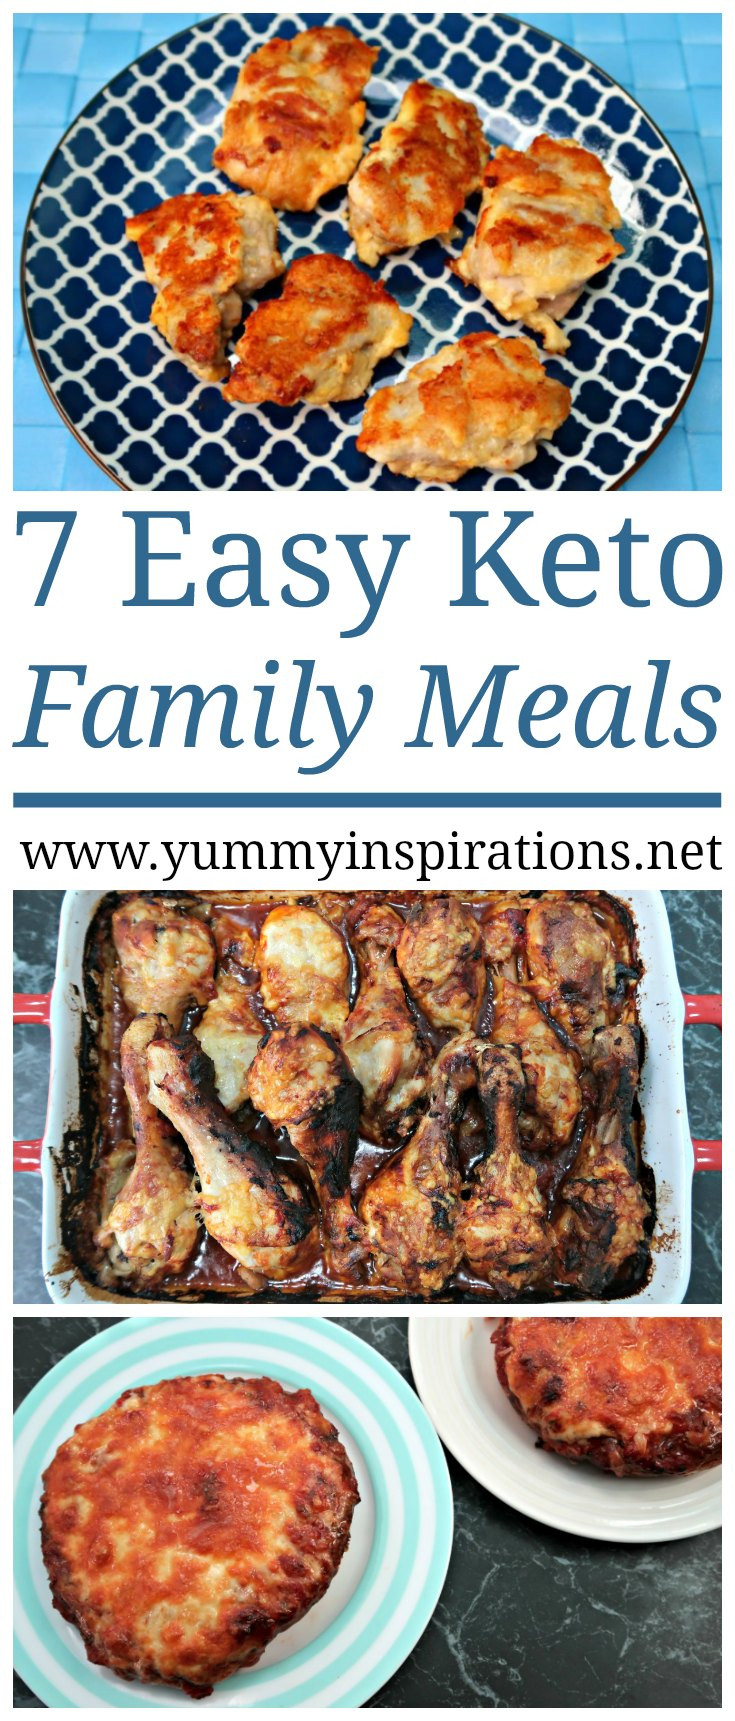 Keto Dinners For Family
 7 Keto Family Meals How to follow the Ketogenic Diet